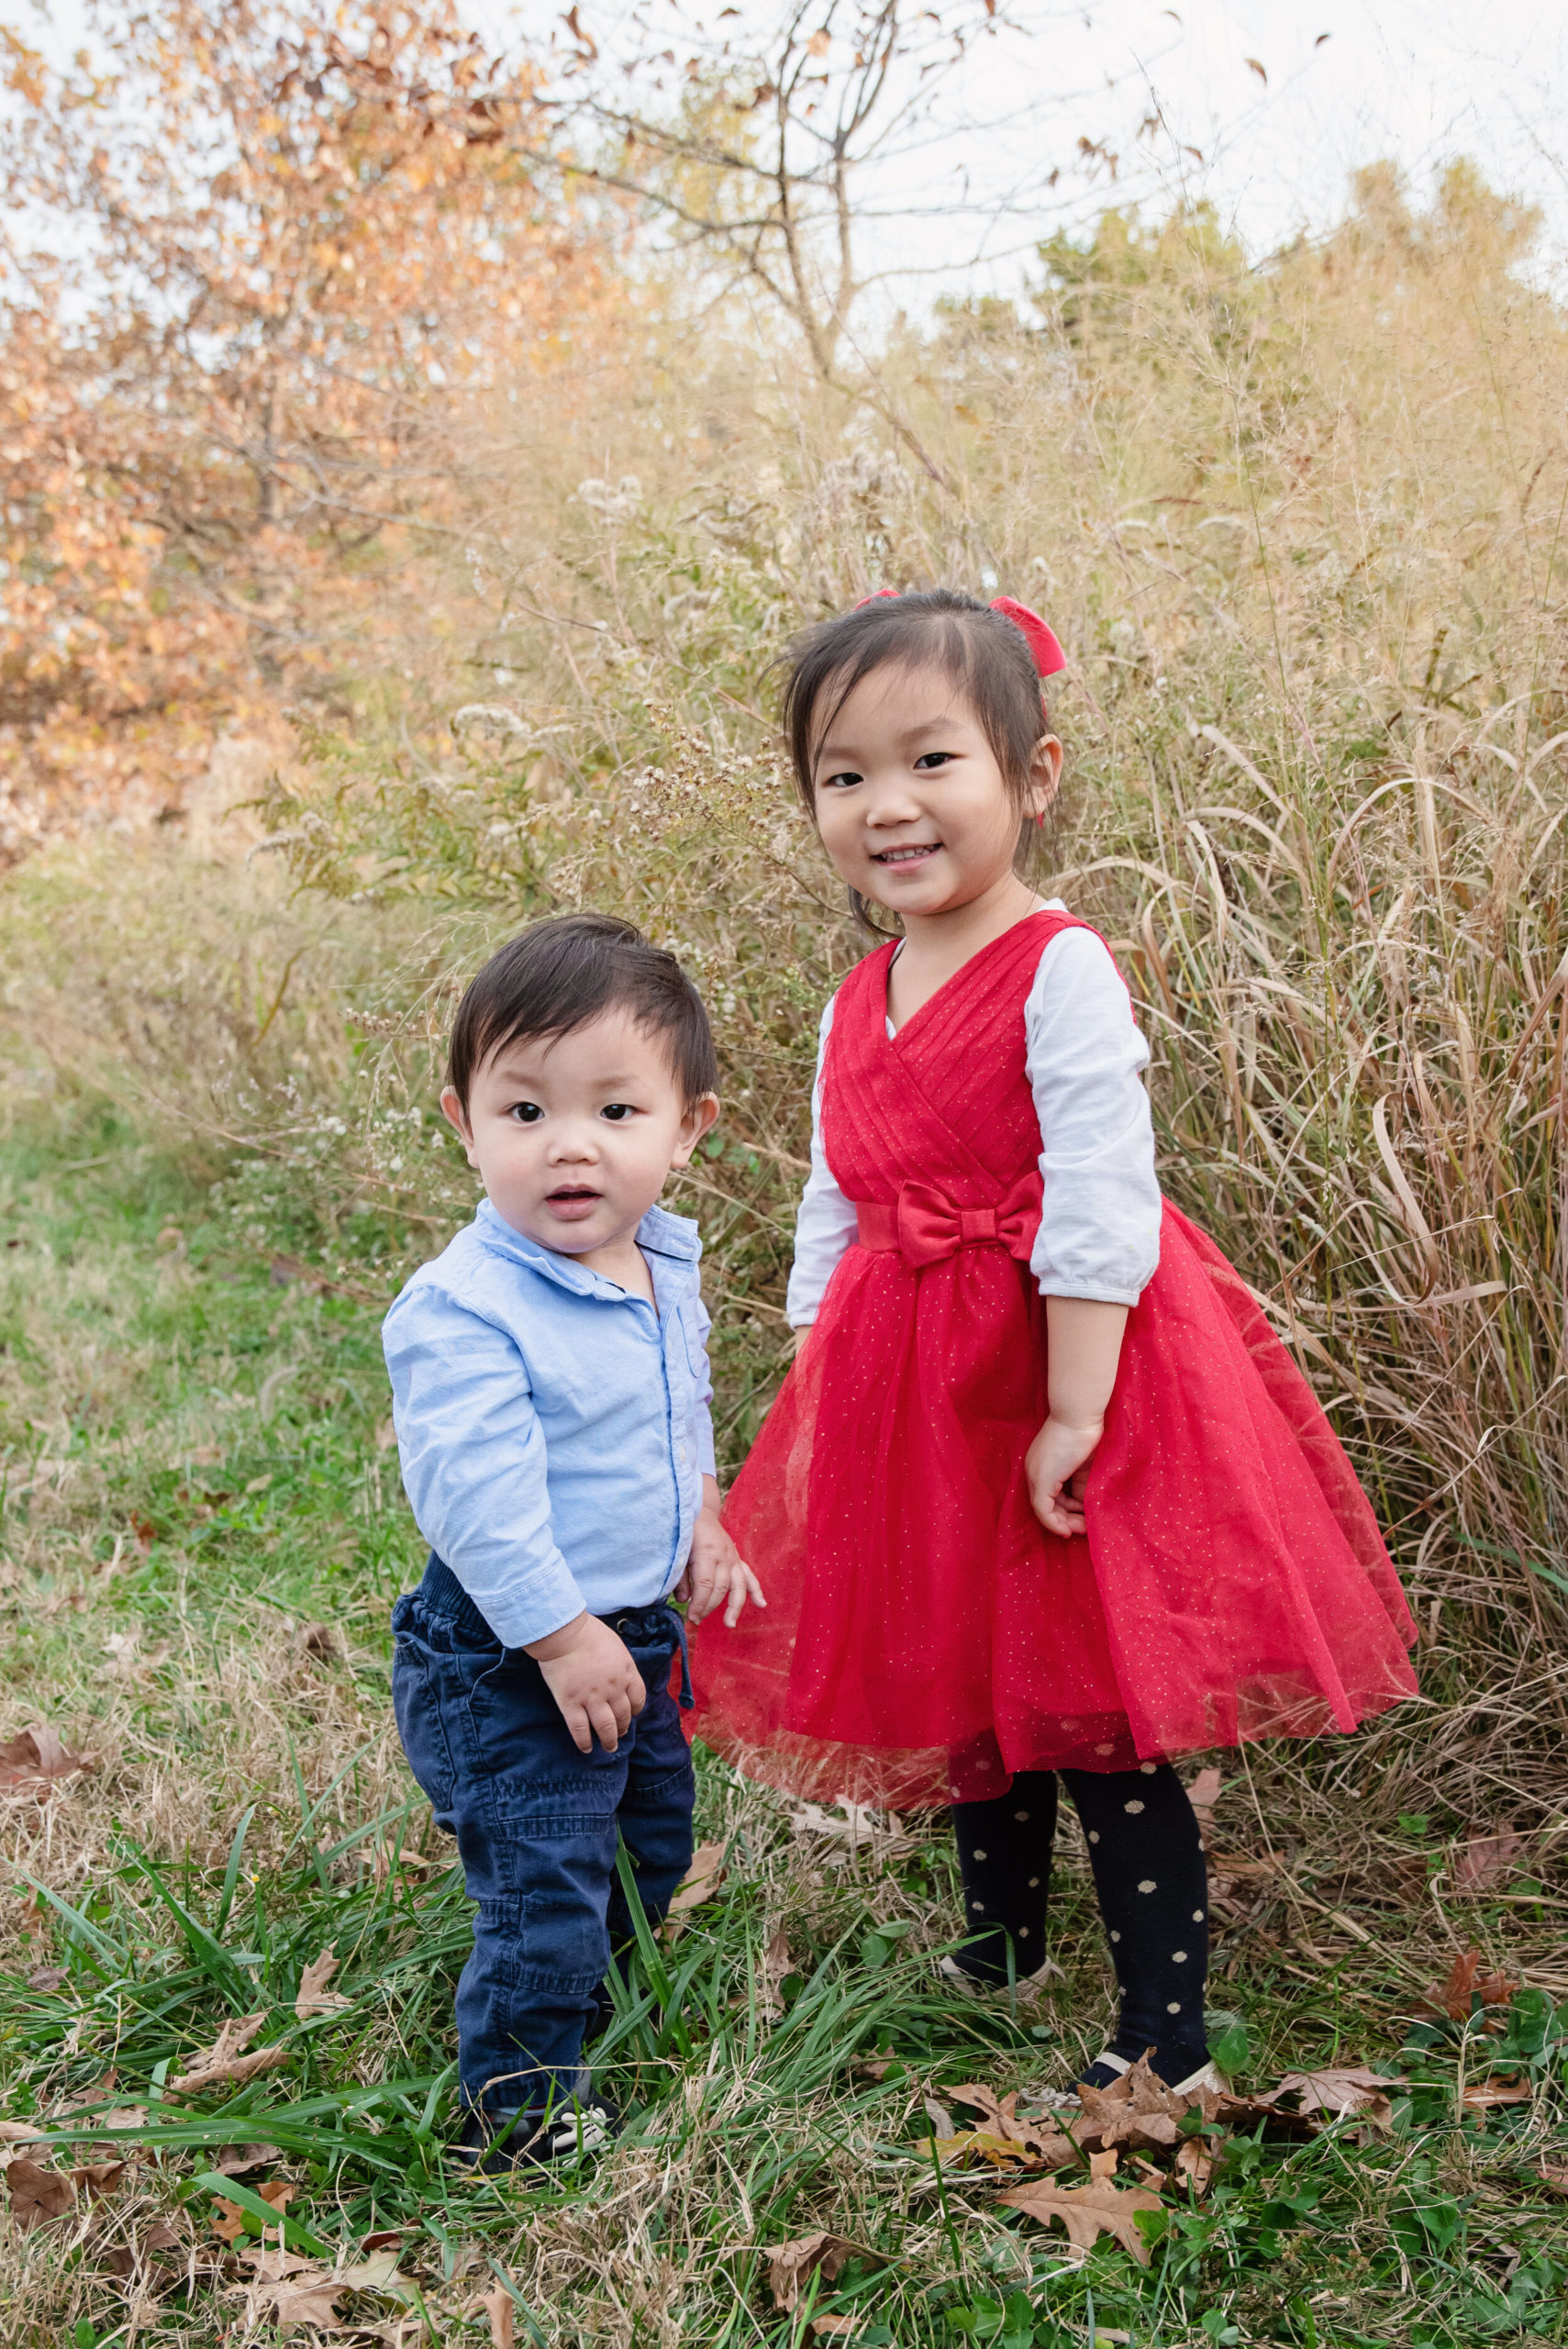 st-louis-fall-mini-session-photogrpaher-brother-and-sister-standing-near-tall-grass-in-fall.jpg